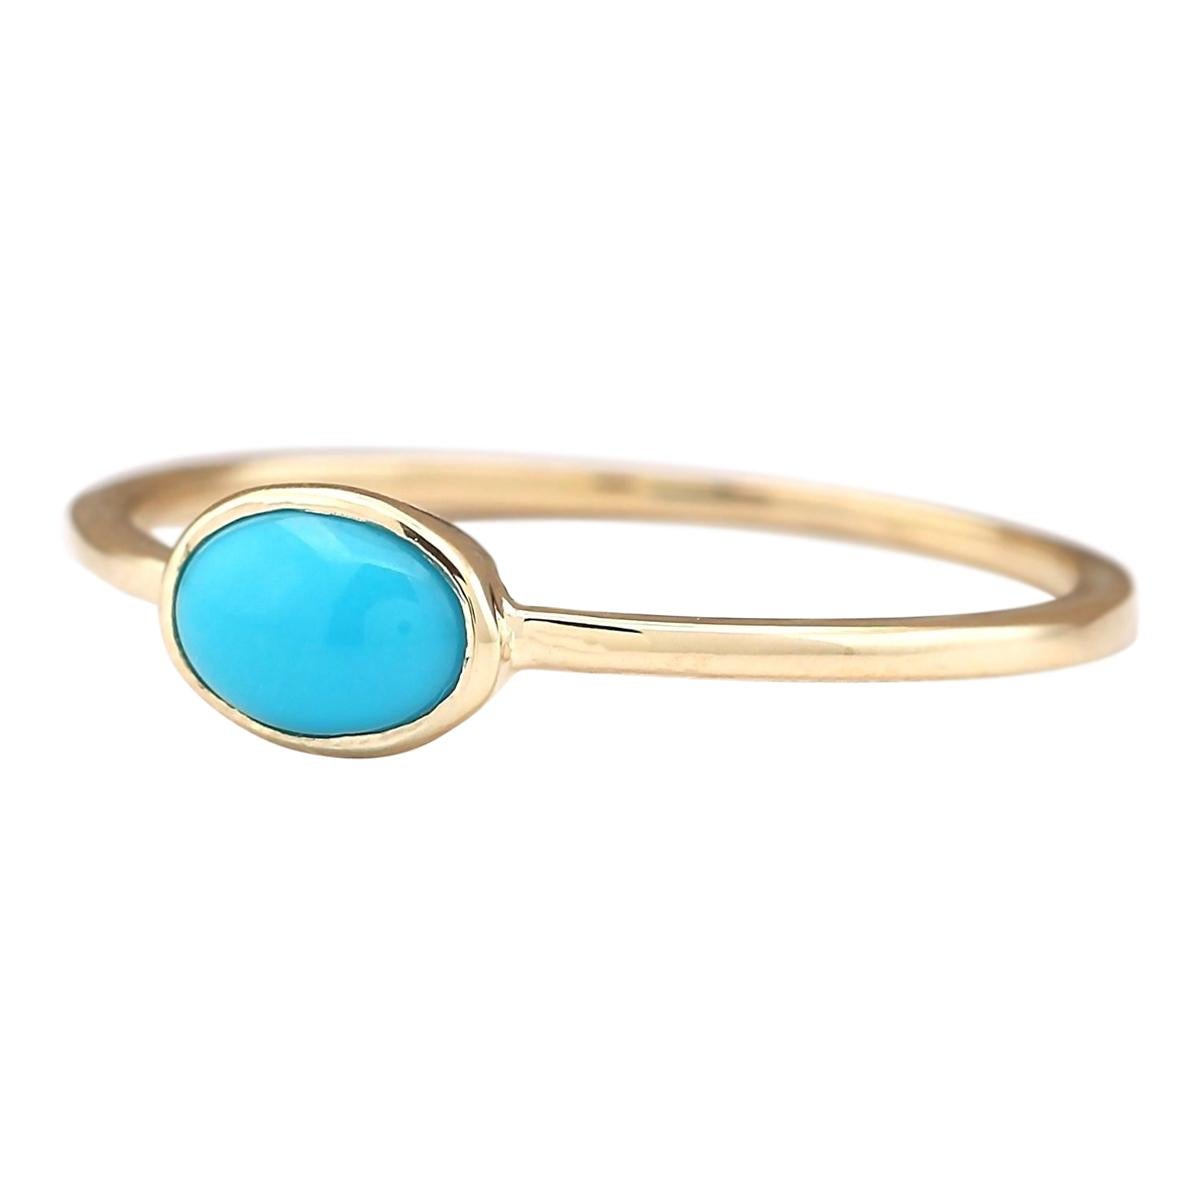 Introducing our exquisite 14 Karat Yellow Gold Ring featuring a stunning 0.50 Carat Natural Turquoise centerpiece. Stamped for authenticity, this ring weighs a mere 1.0 gram, ensuring comfort and wearability. The natural turquoise gemstone, weighing